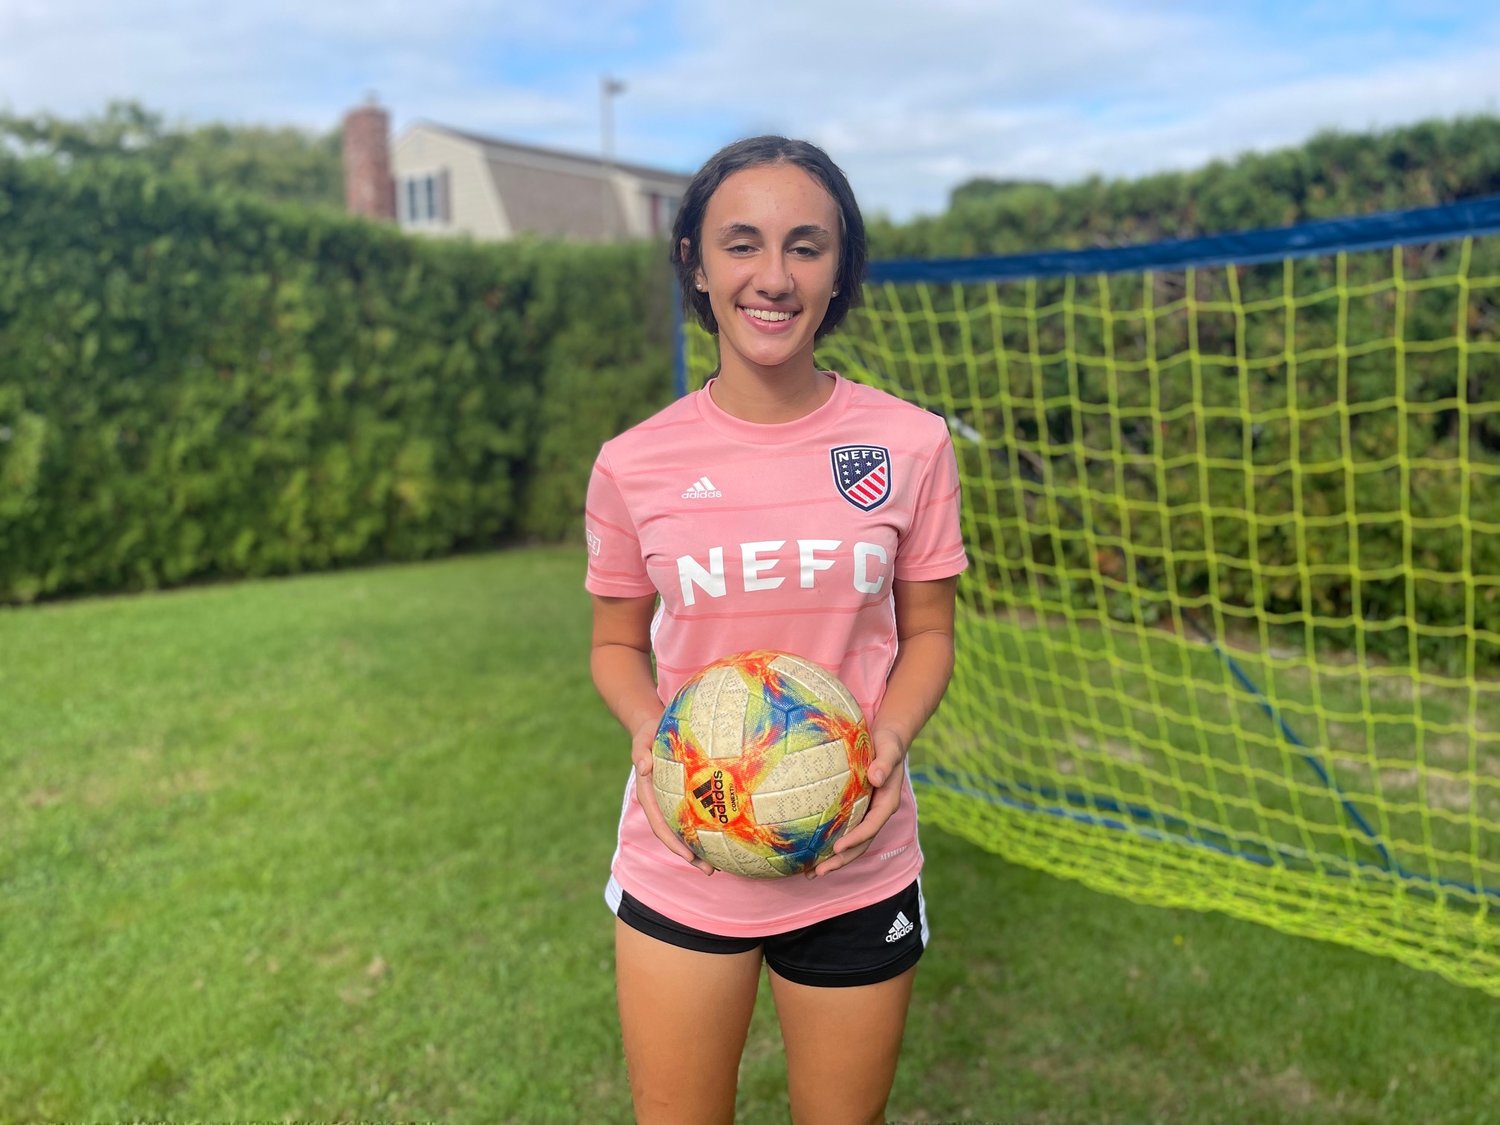 Bristol’s Emma Goglia is one of 60 U-15 players invited to a national talent camp